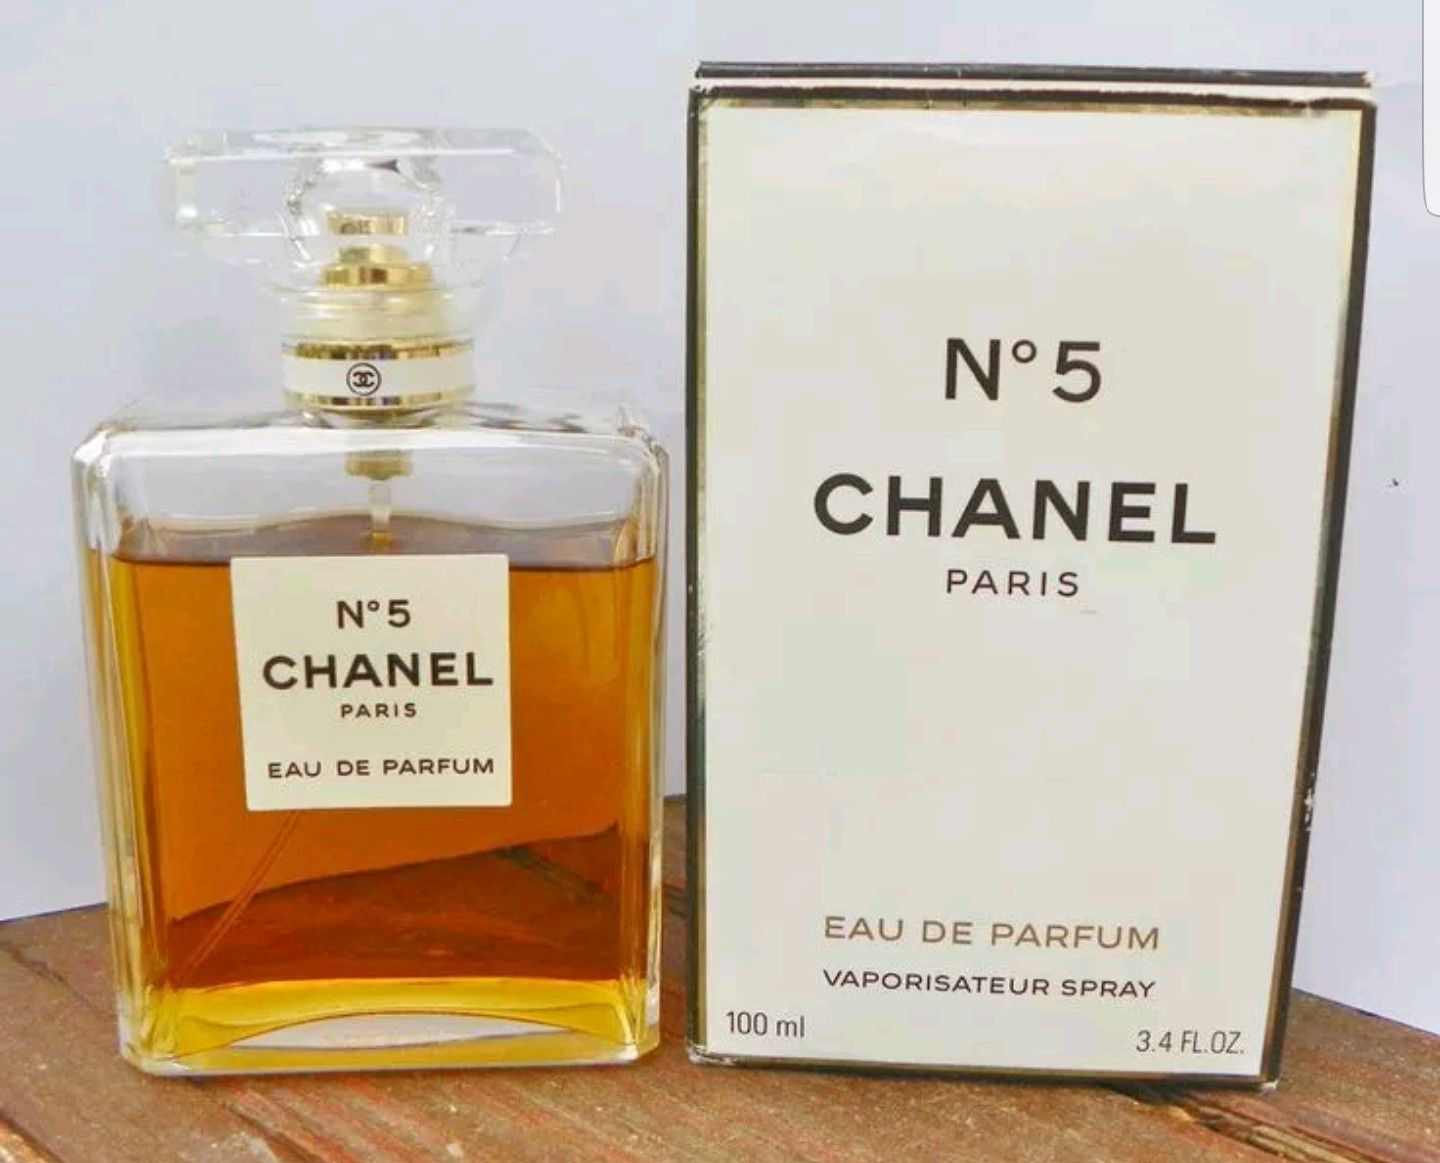 New Chanel No. 5 perfume for Sale in Honolulu, HI - OfferUp